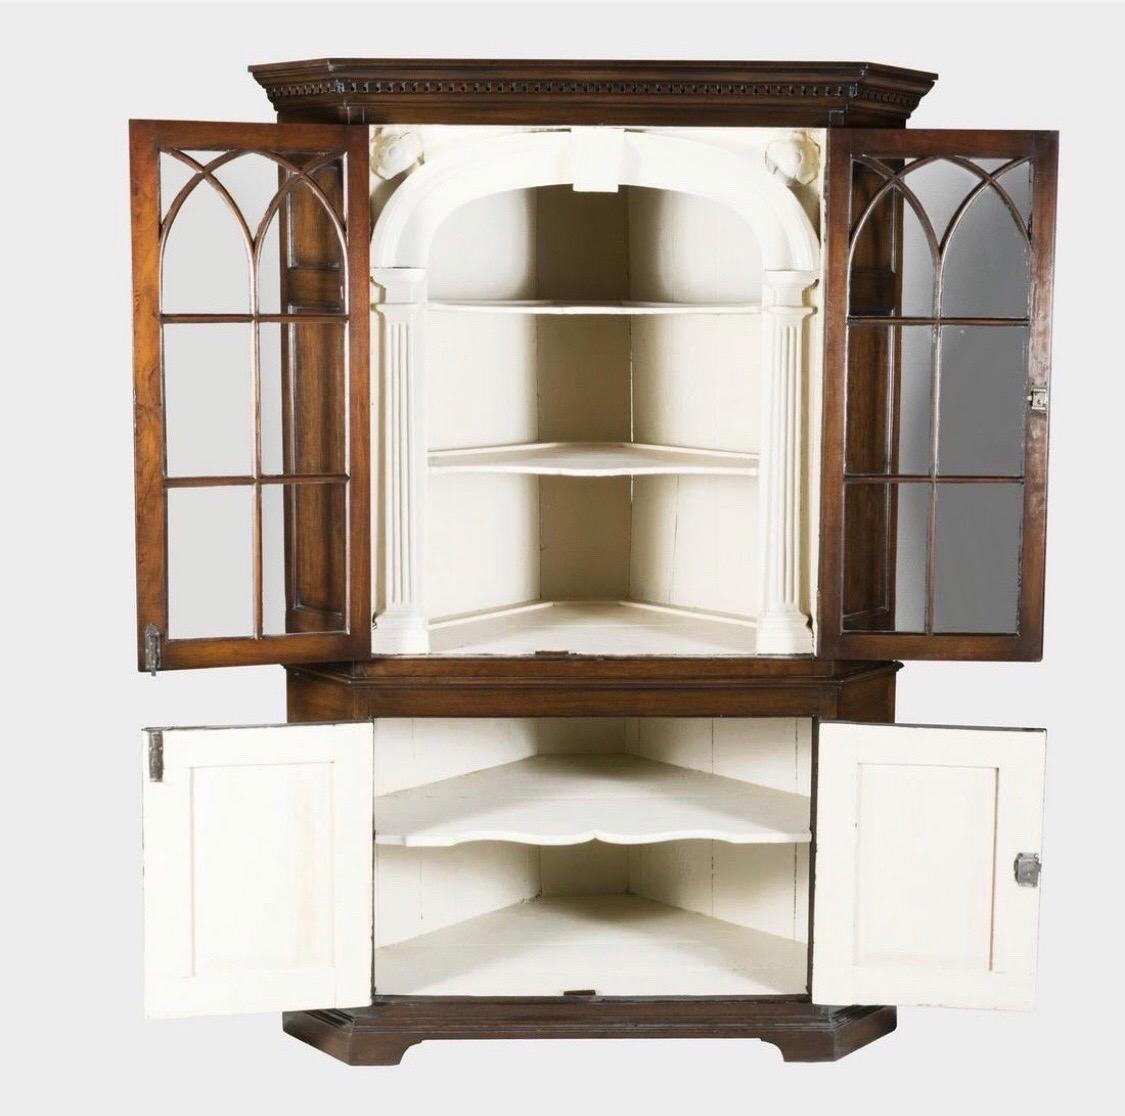 2 part cupboard consisting of 2 glazed doors over 2 paneled doors on the base. Dentil molding across the top, gothic arches in the glazed doors opening to 2 carved rosettes in the corners and 3 shelves. Creme painted interior. 



 